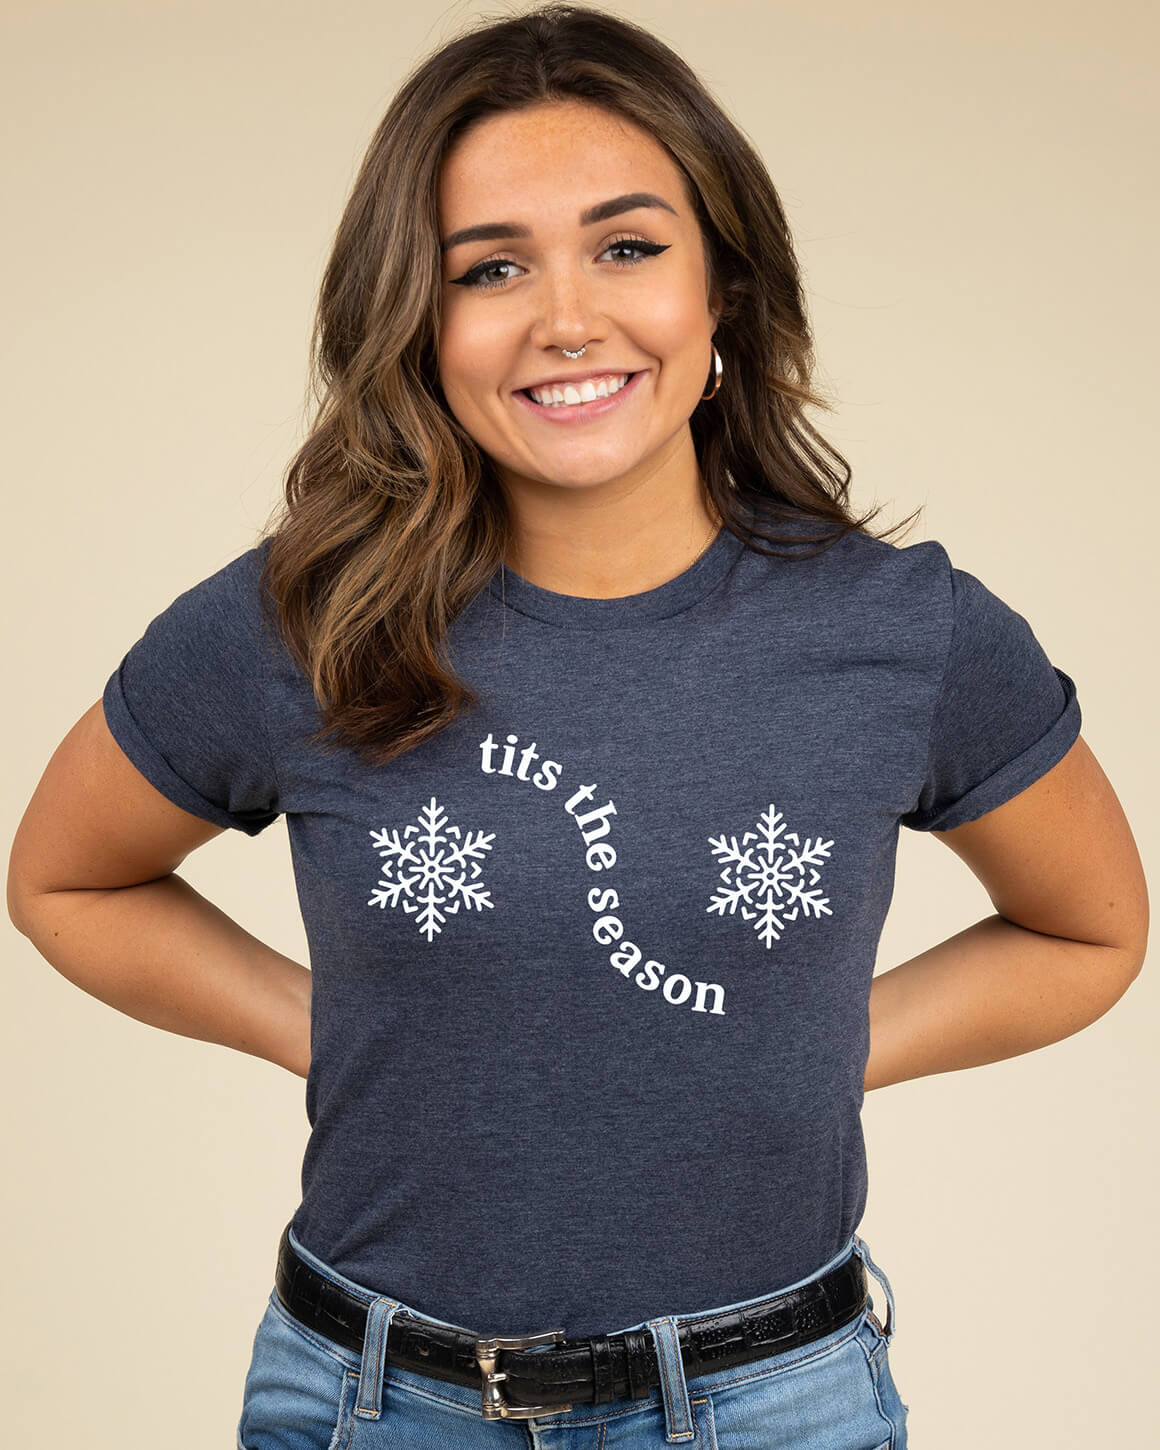 Woman smiling in body positive tits the season Christmas shirt